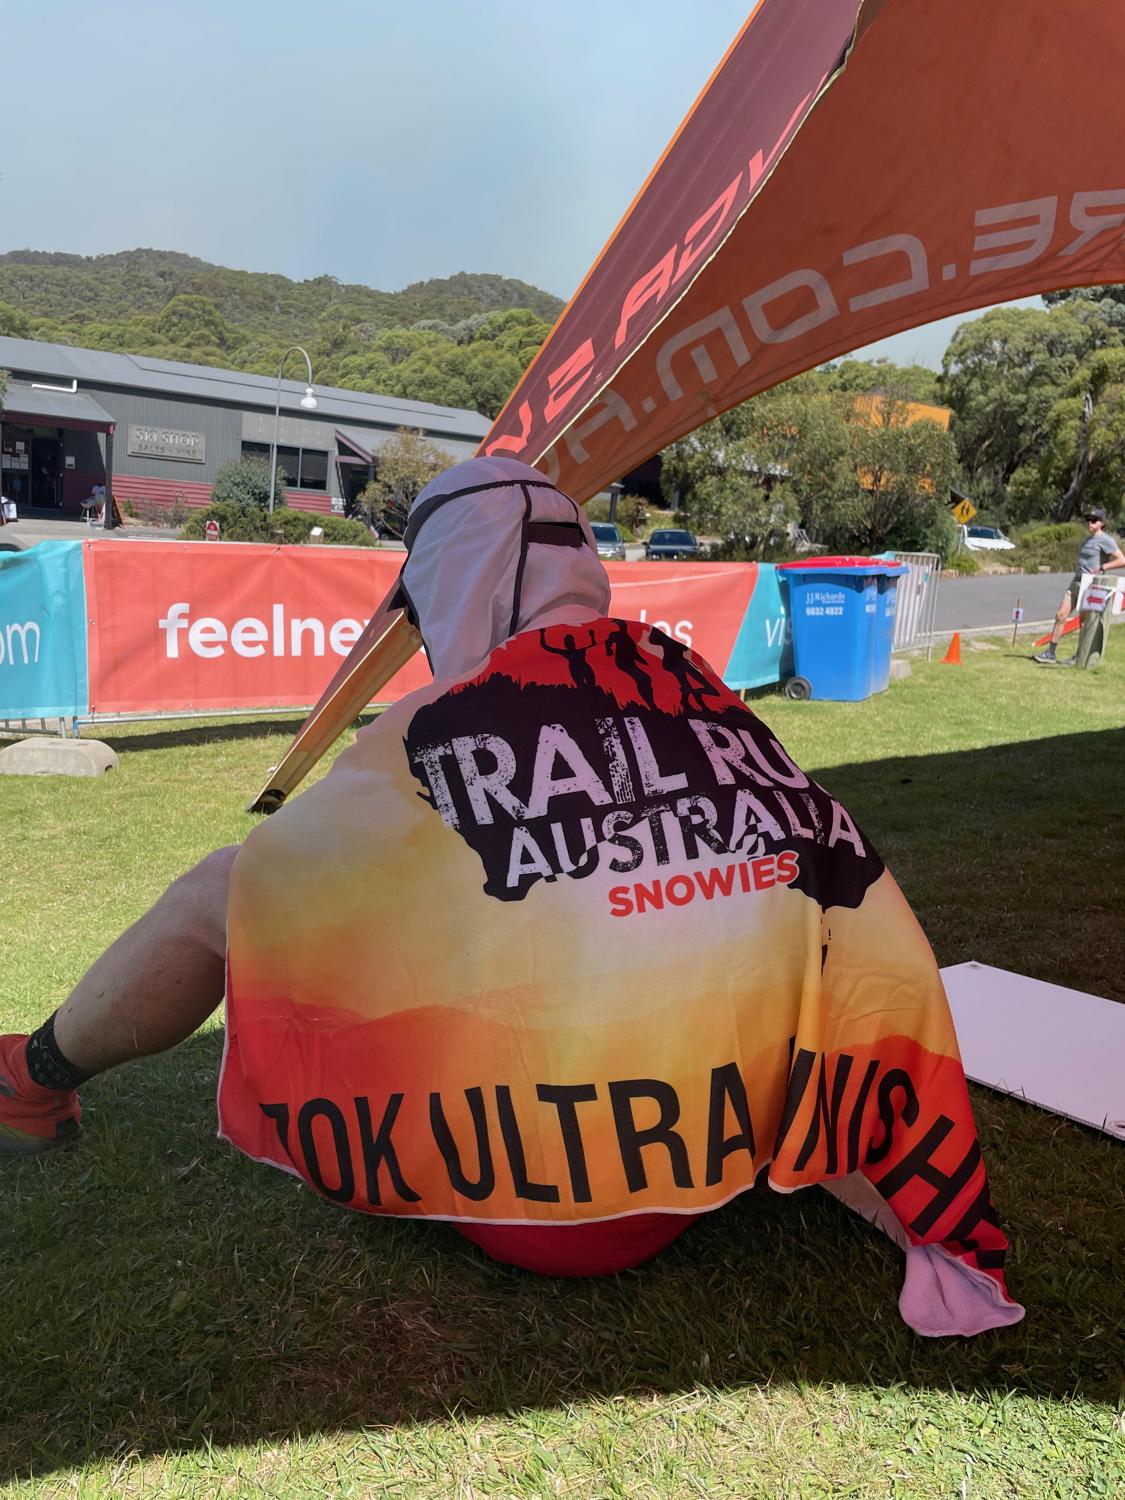 Race Report - UTRA Snowy Mountains 70km